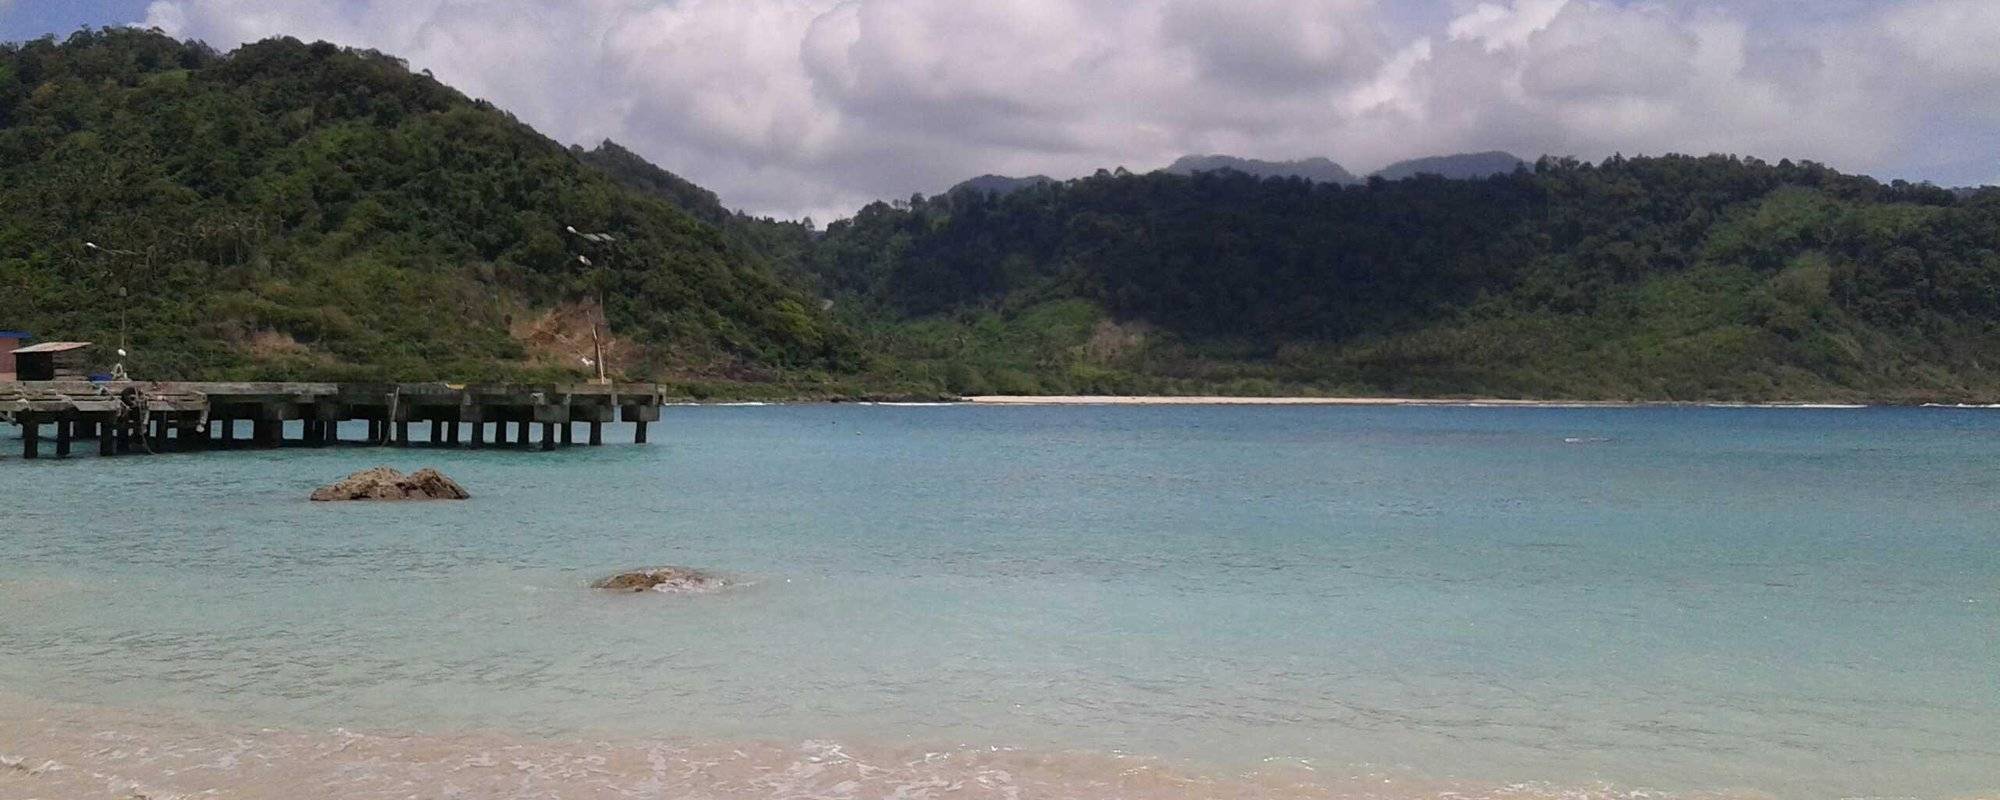 ISLAND TRIP Part 1 | Exploring the Beautiful Islands of Aceh - A neglected paradise.